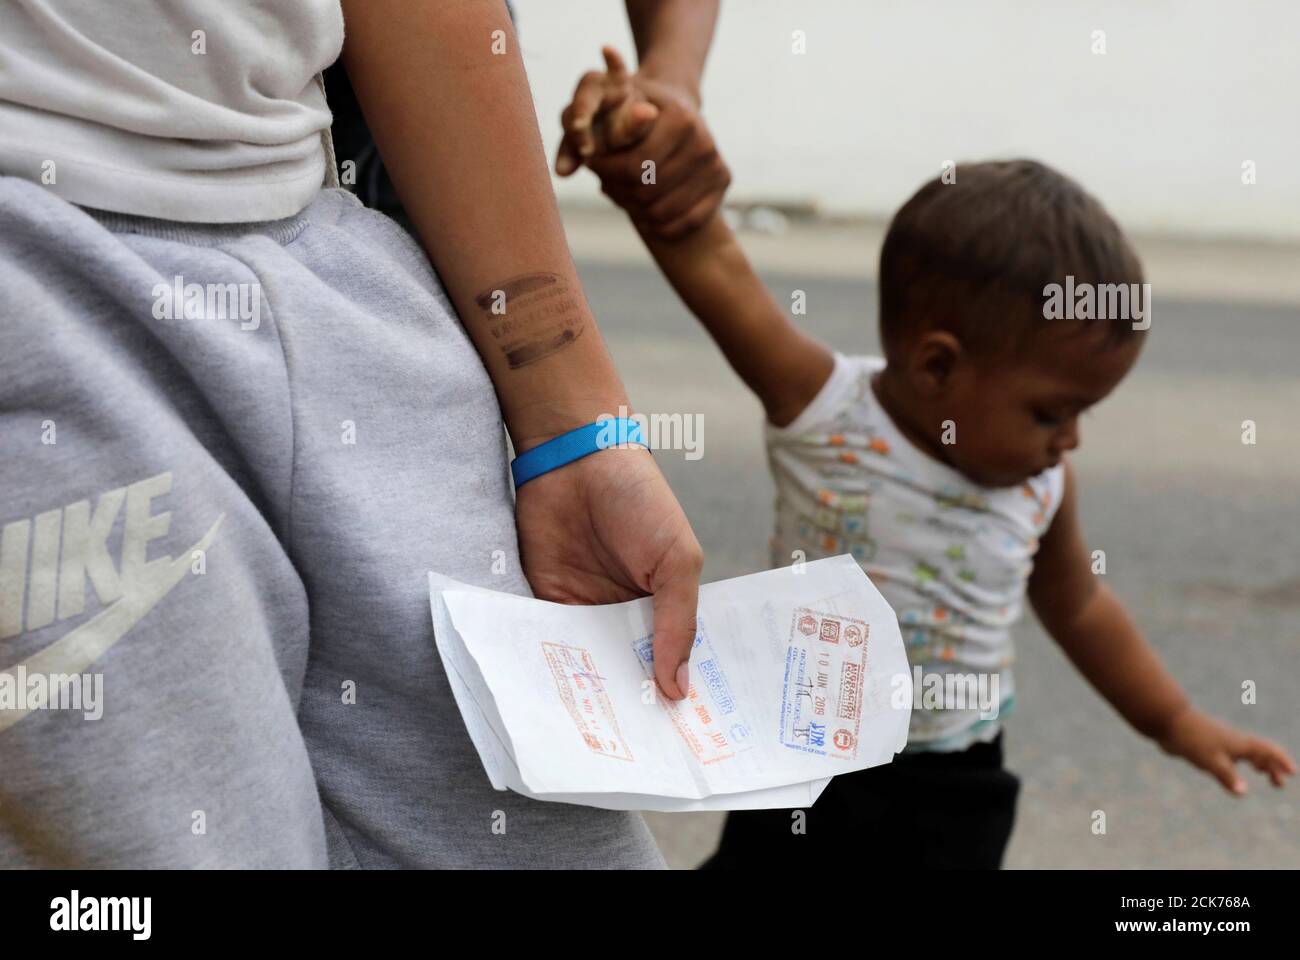 Venezuelan girl Uslady holds papers after she and her family finished immigration procedures ahead of a June 15 deadline for all Venezuelan migrants to have valid visas and passports, in Tumbes, Peru June 14, 2019. REUTERS/Guadalupe Pardo Stock Photo